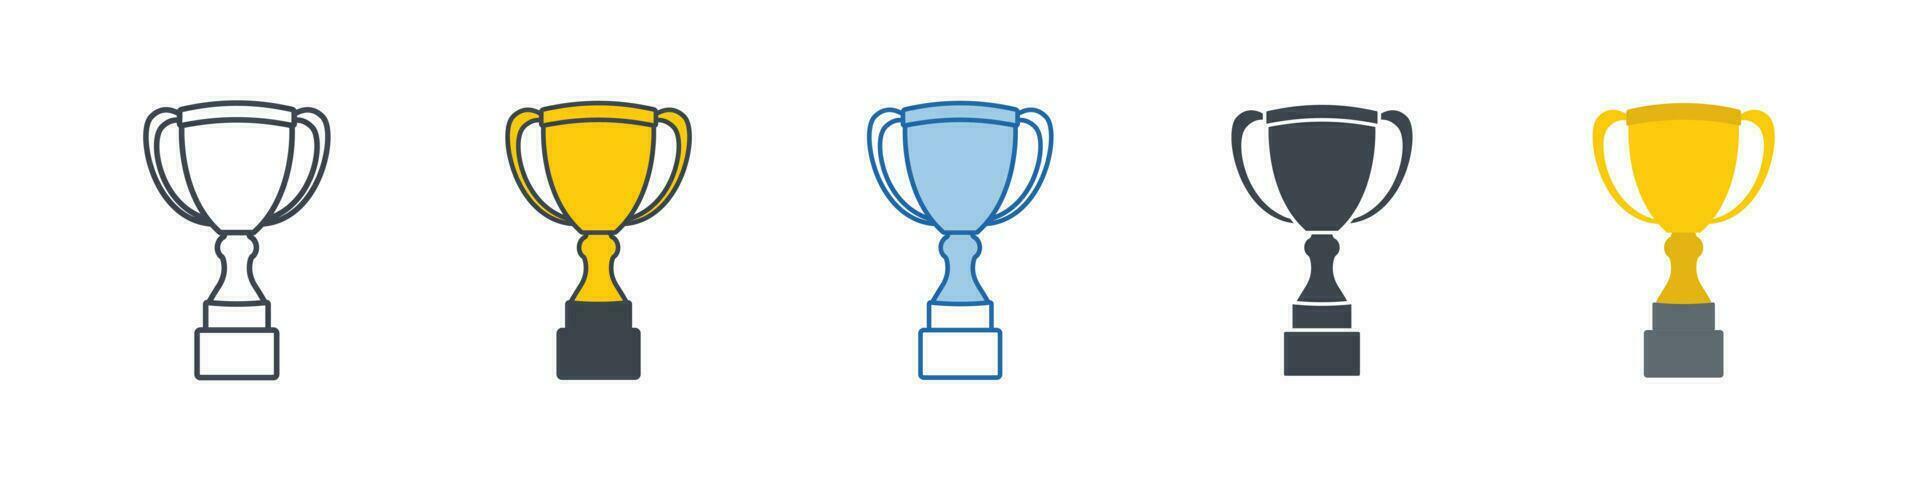 Trophy icon symbol template for graphic and web design collection logo vector illustration